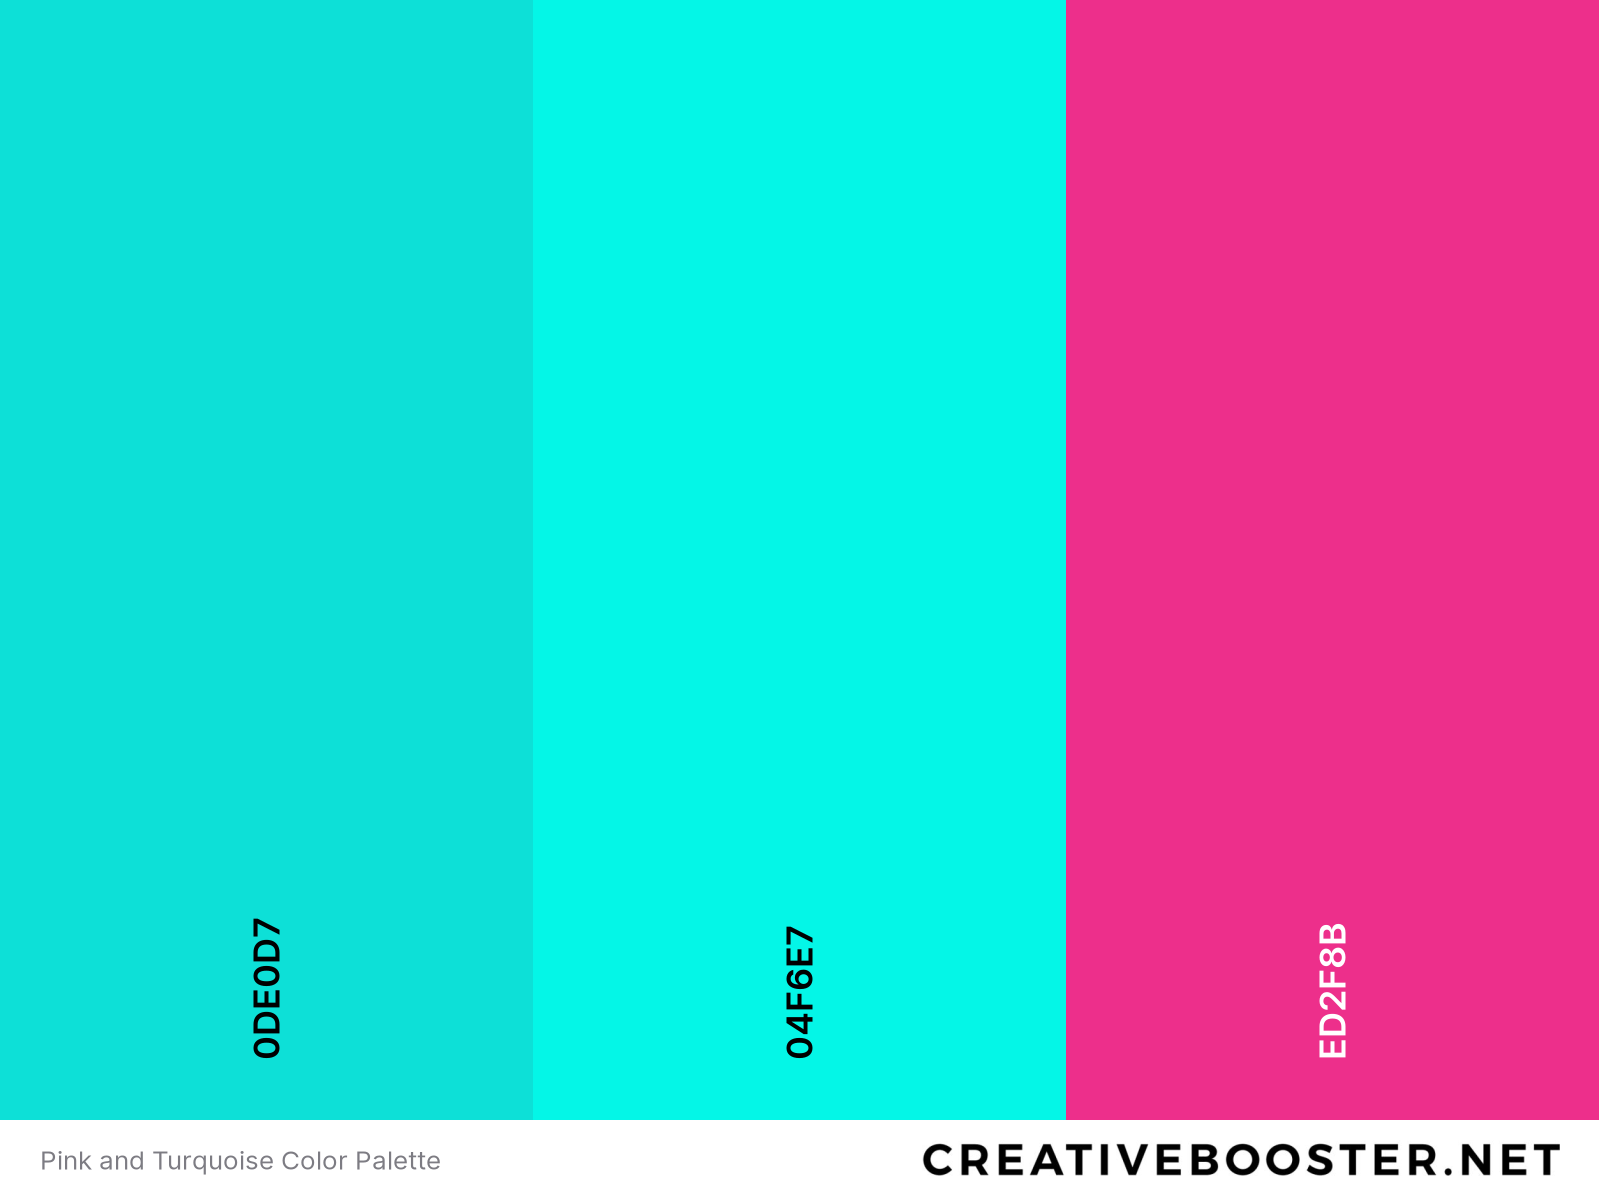 Pink and Turquoise Color Palette